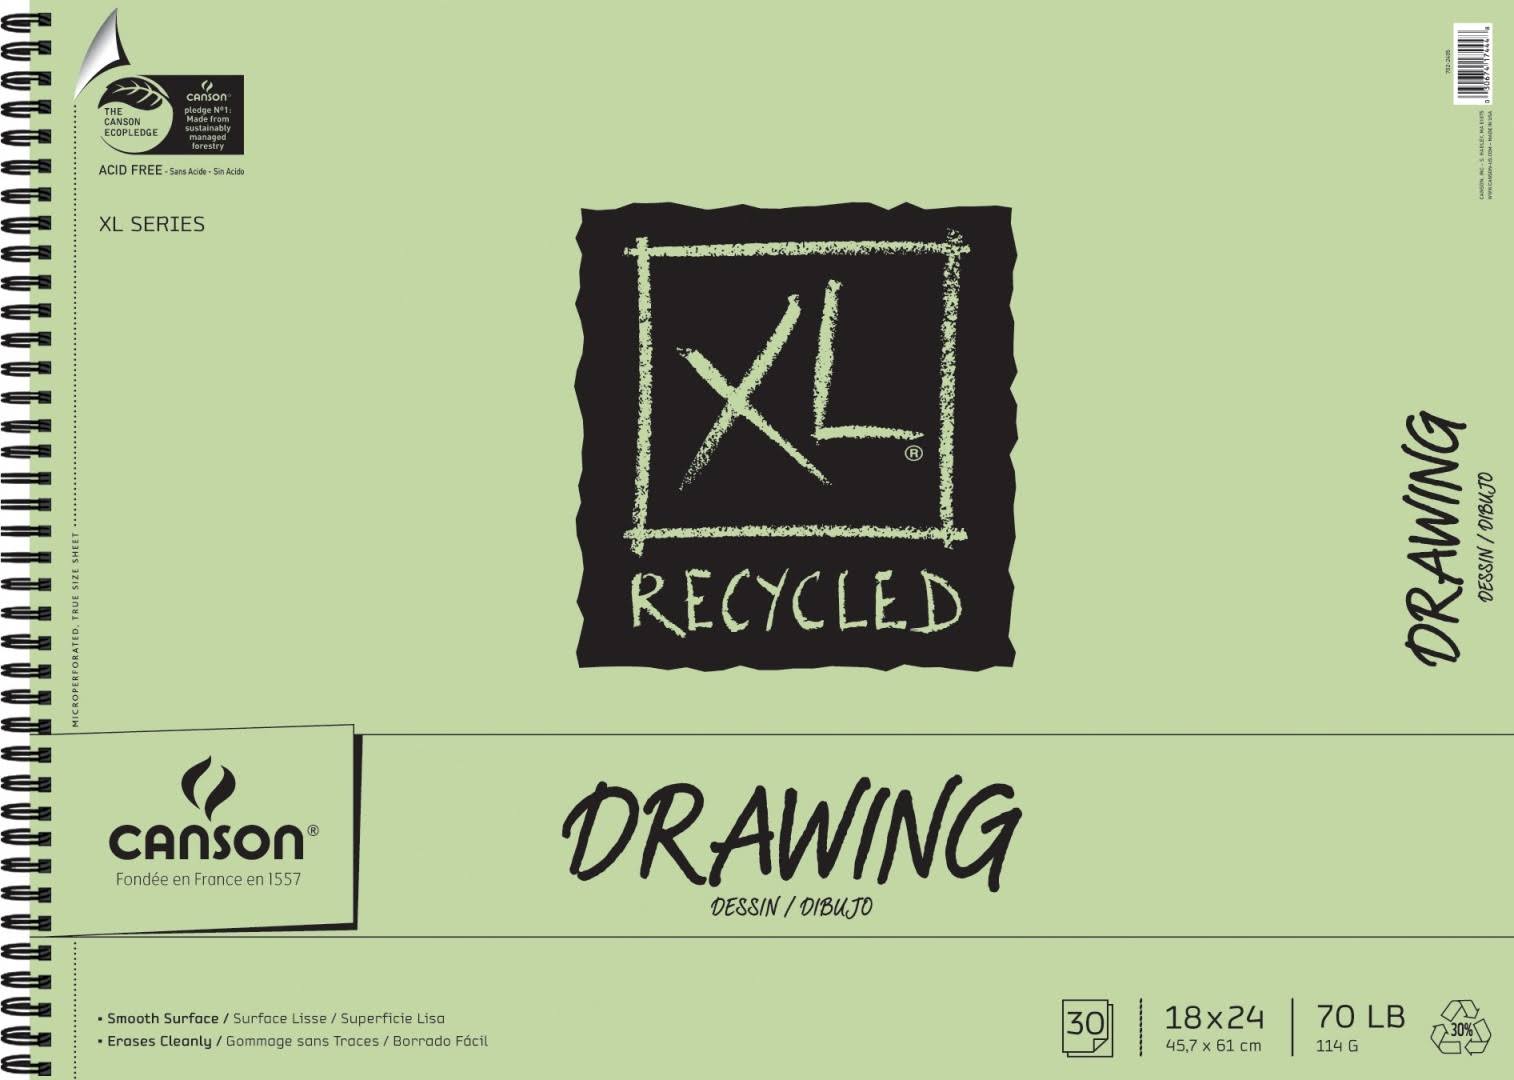 Canson XL Recycled Drawing Pads - 18x24 in